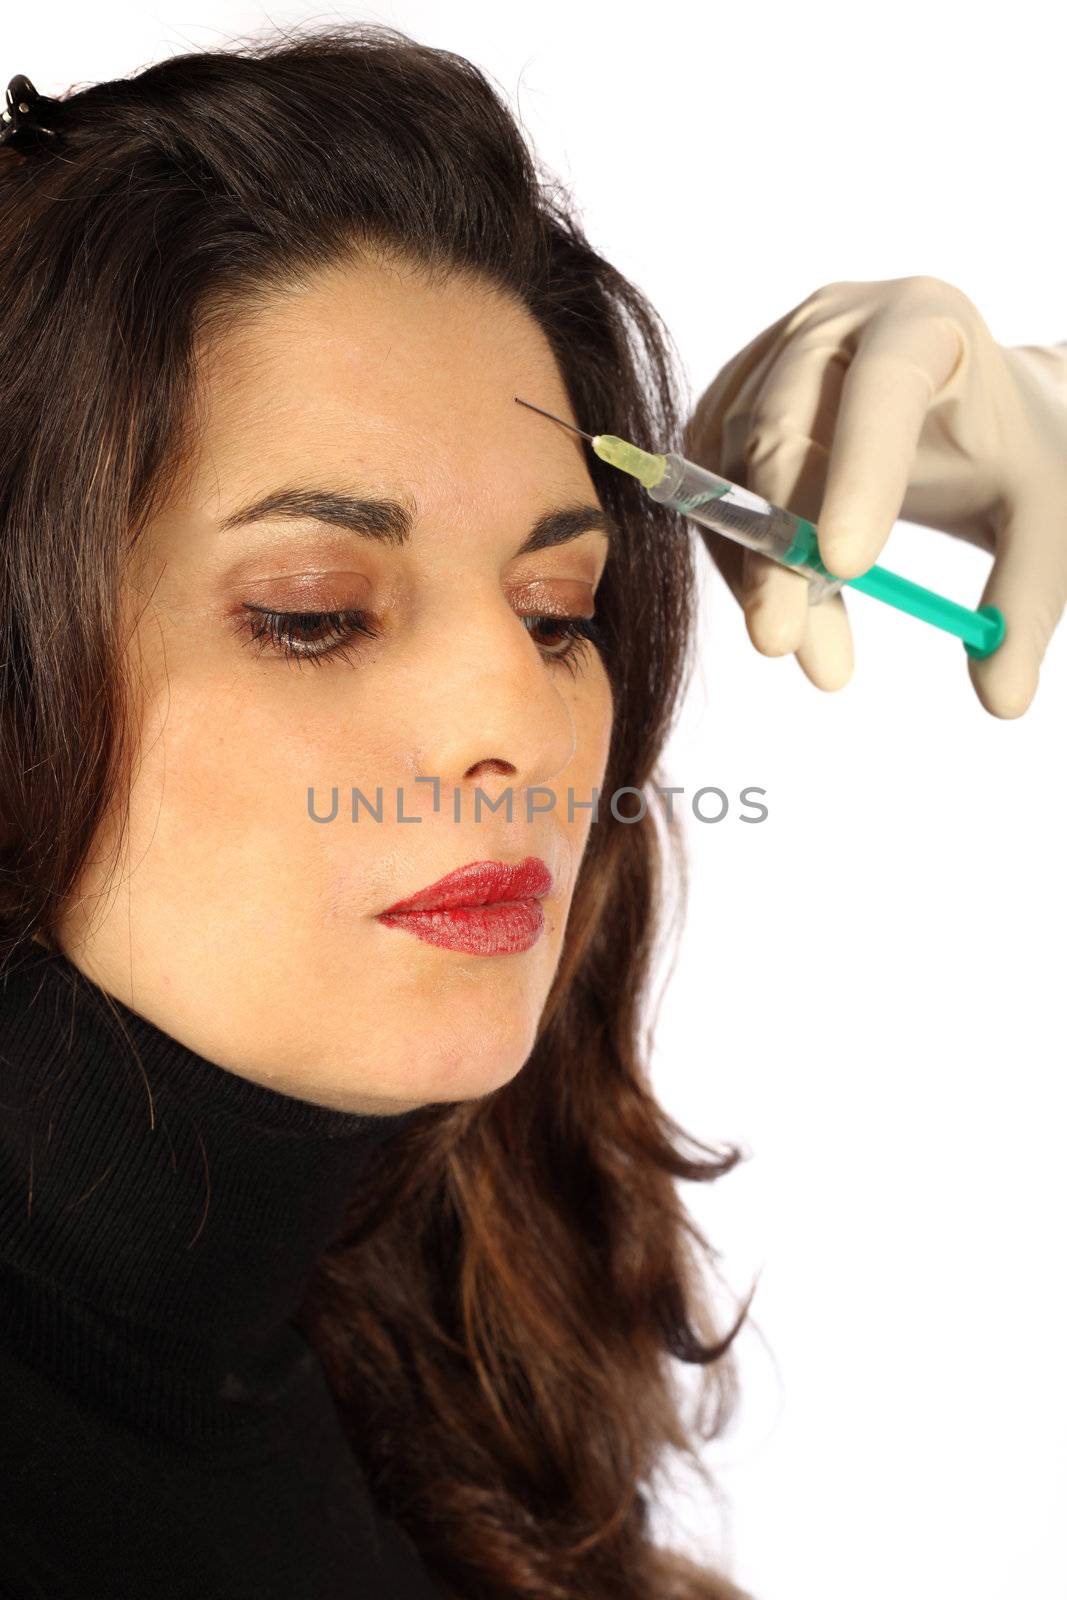 Young woman receives botox injection in her forehead - Close-up